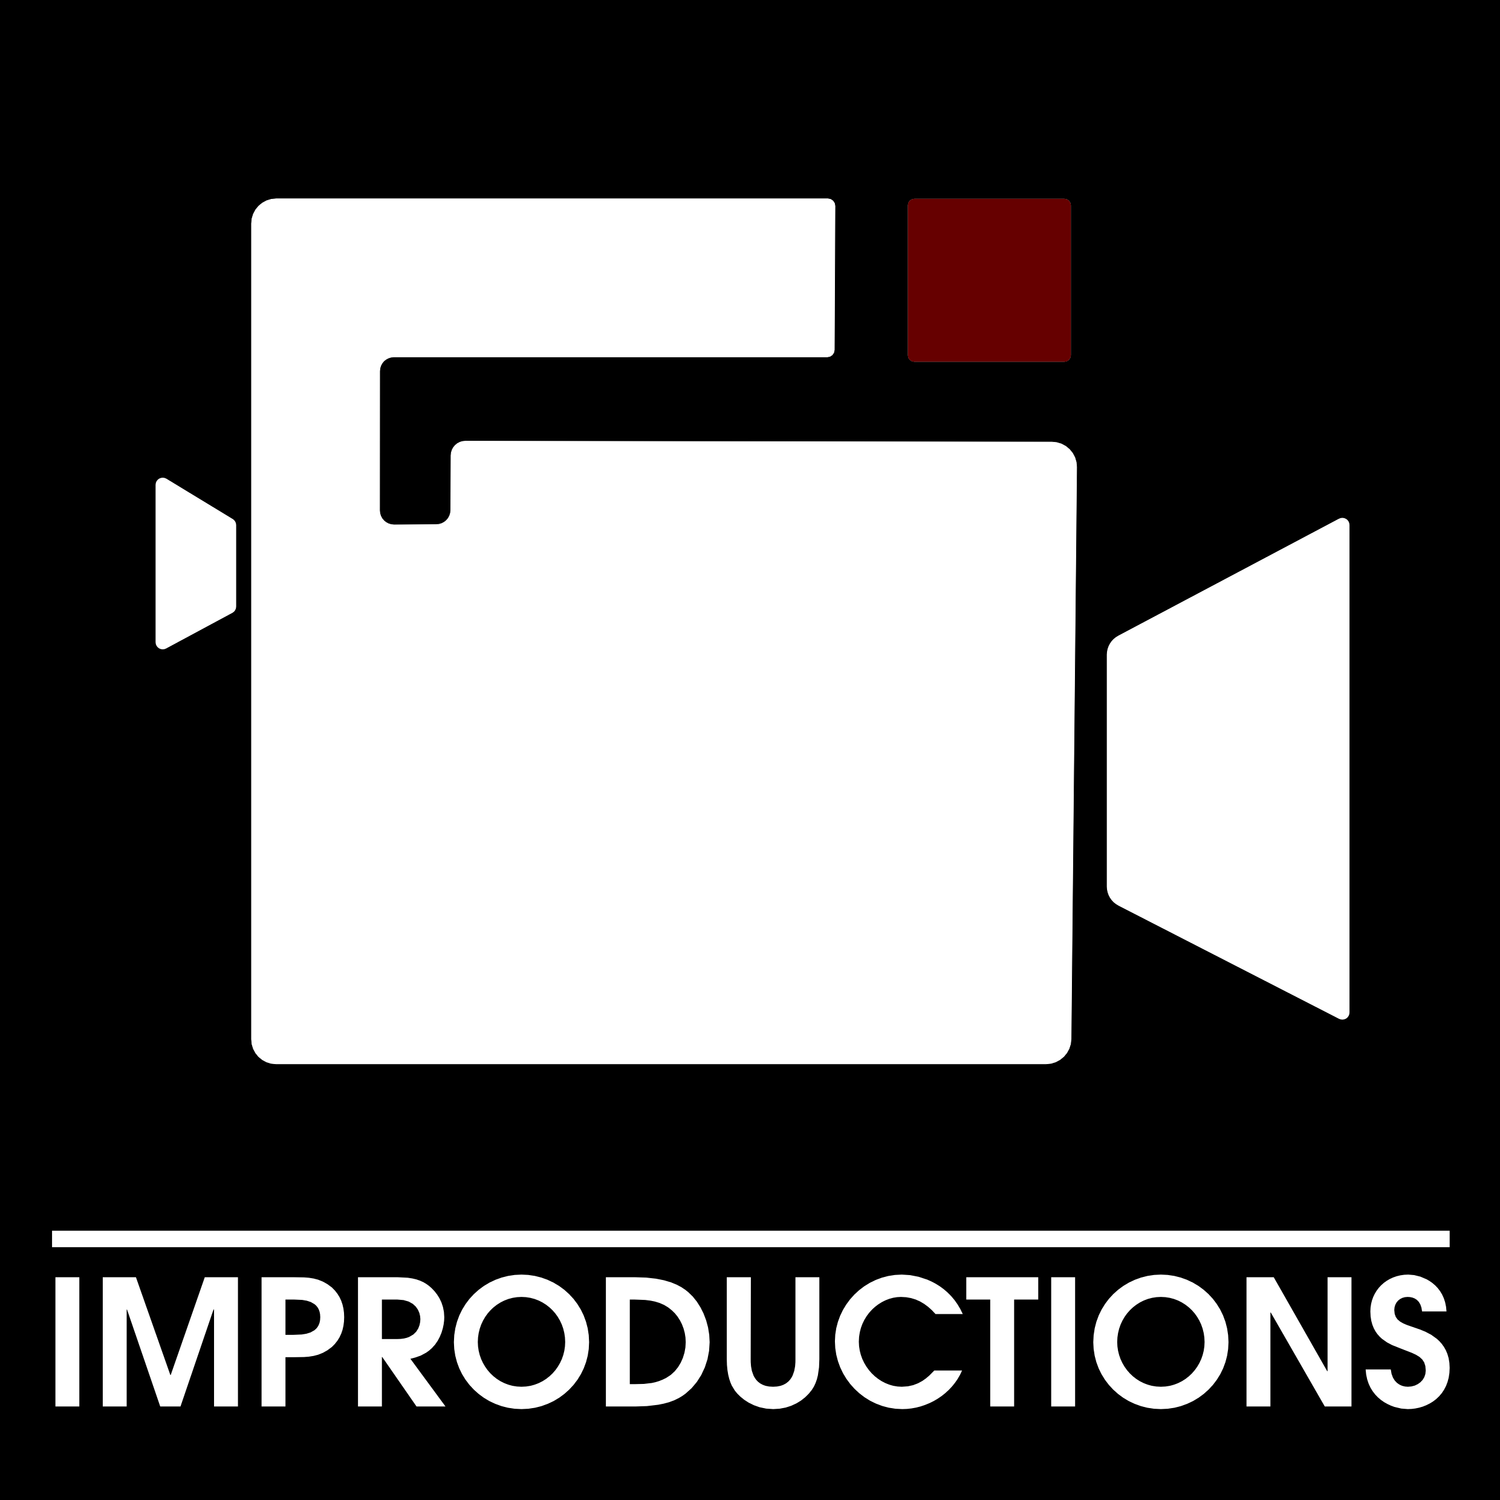 IMPRODUCTIONS